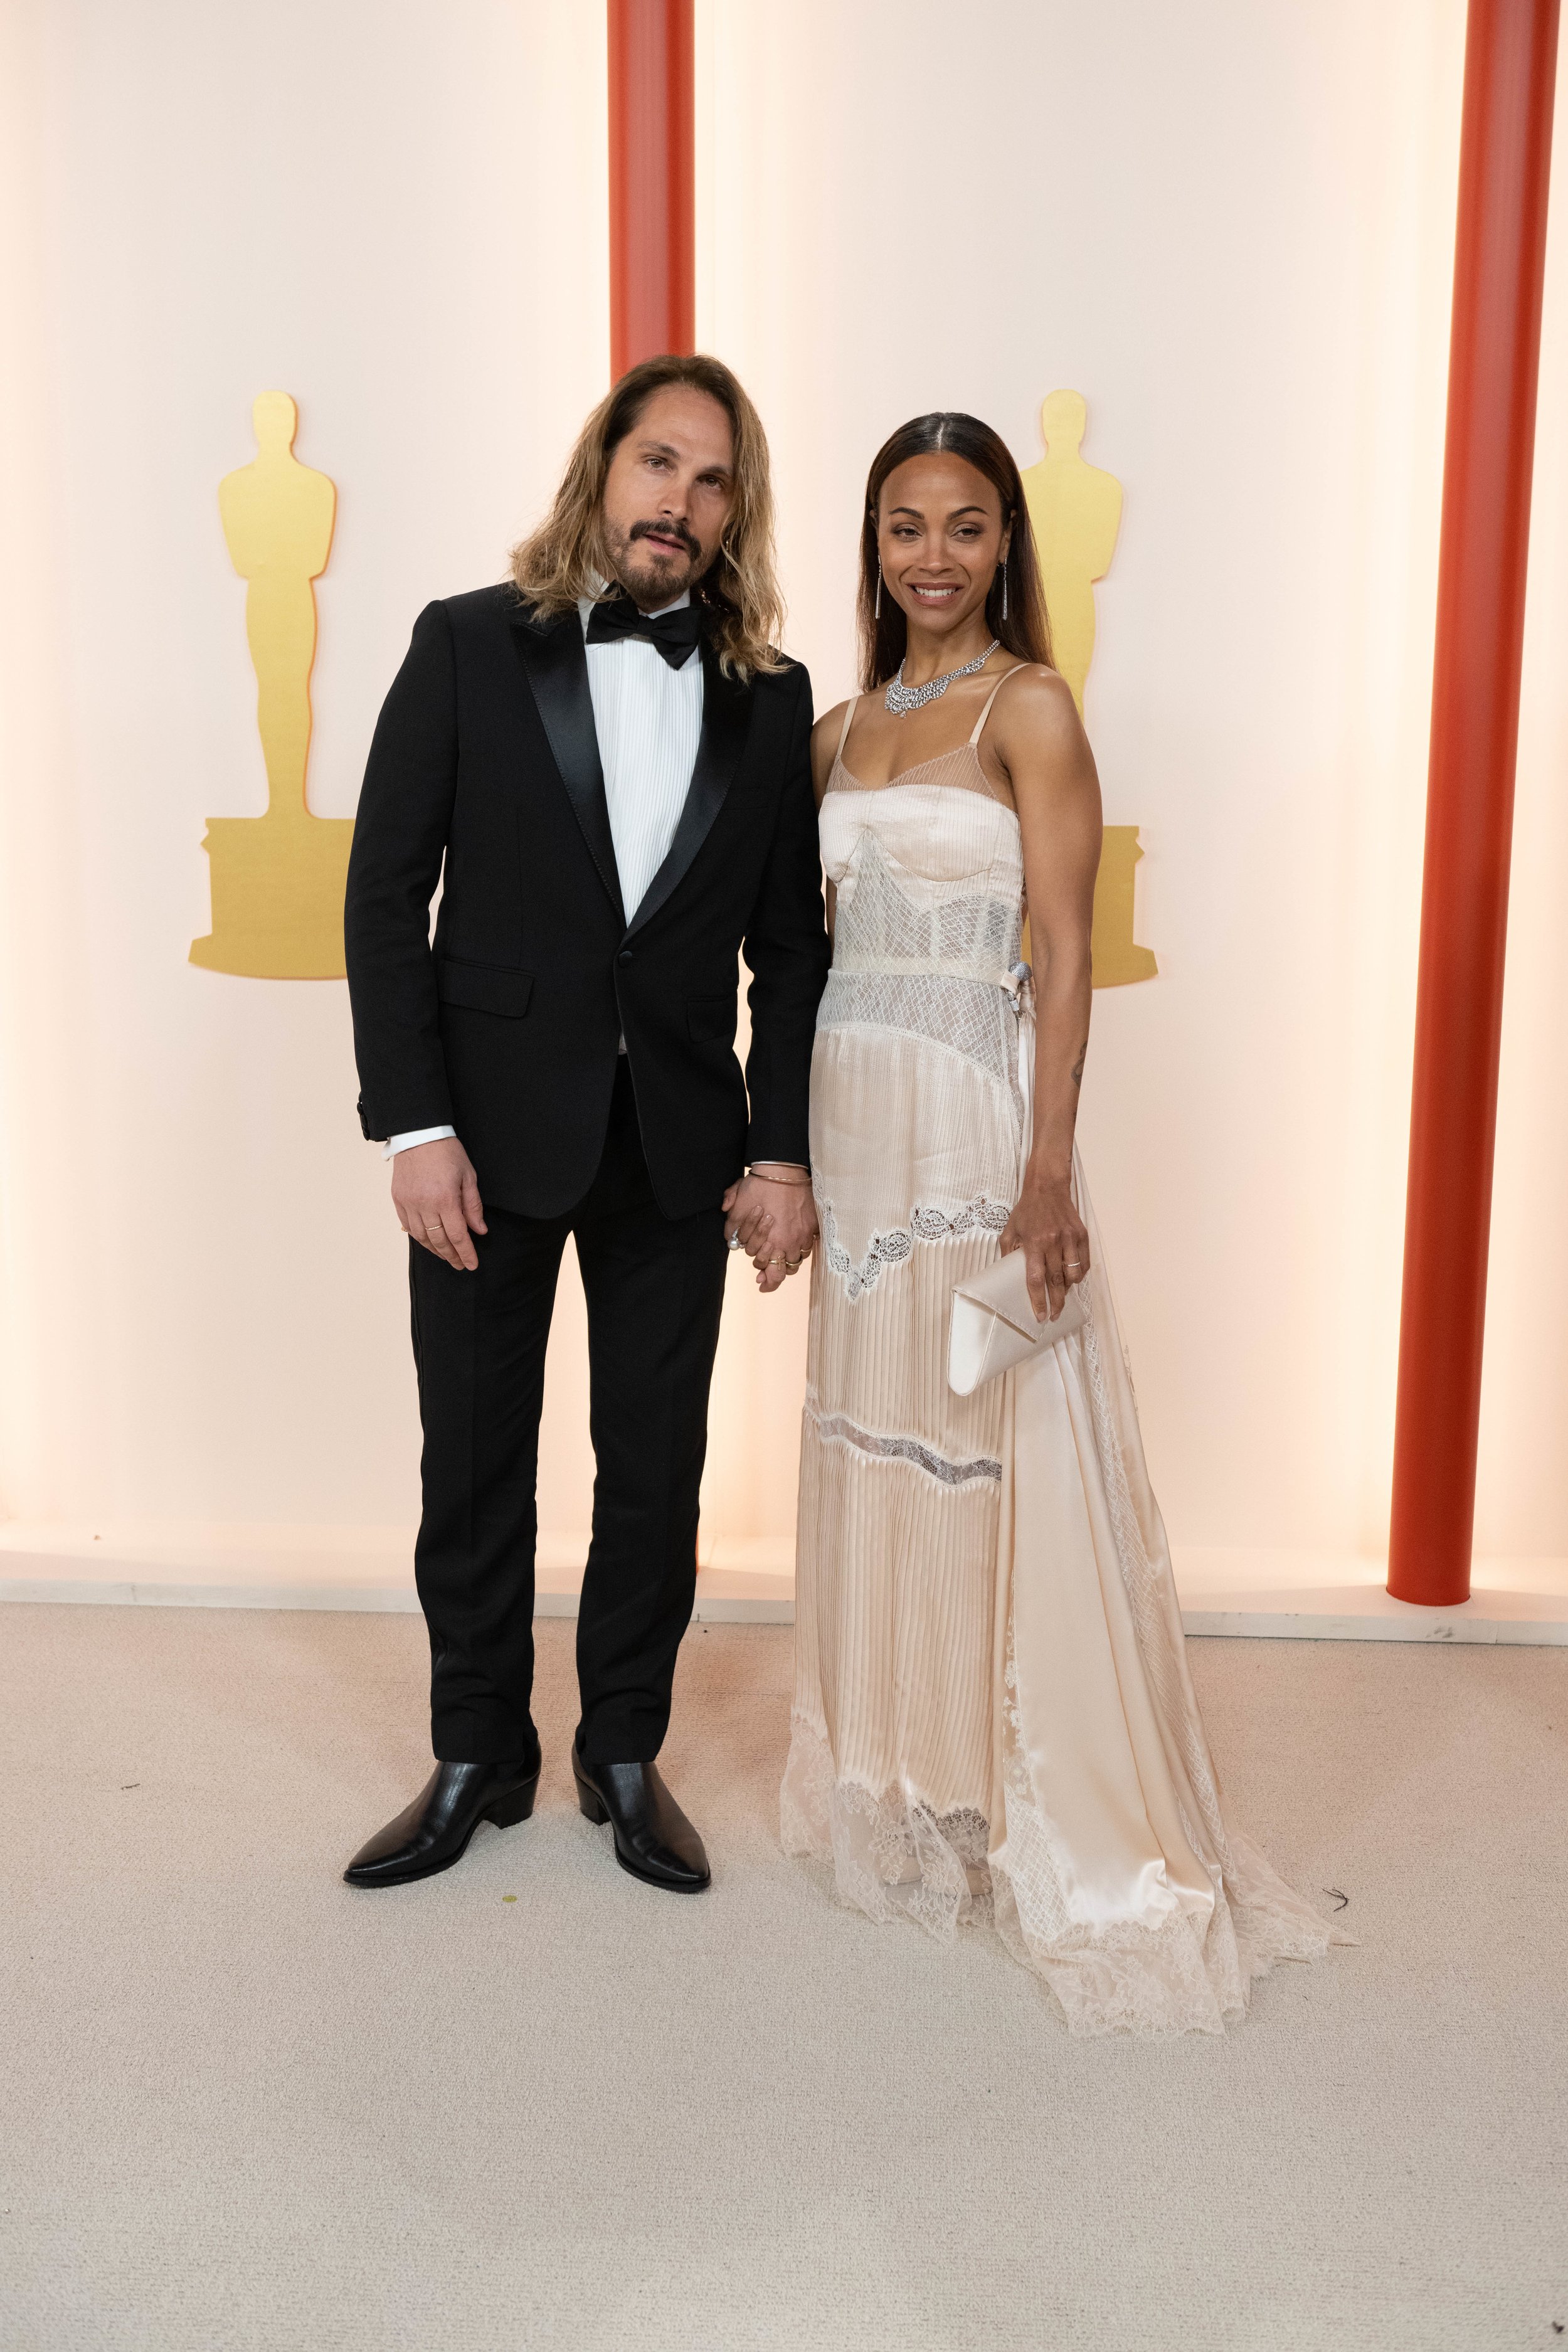 Marco Perego Saldana and Zoe Saldana arrive on the red carpet of The 95th Oscars® at the Dolby